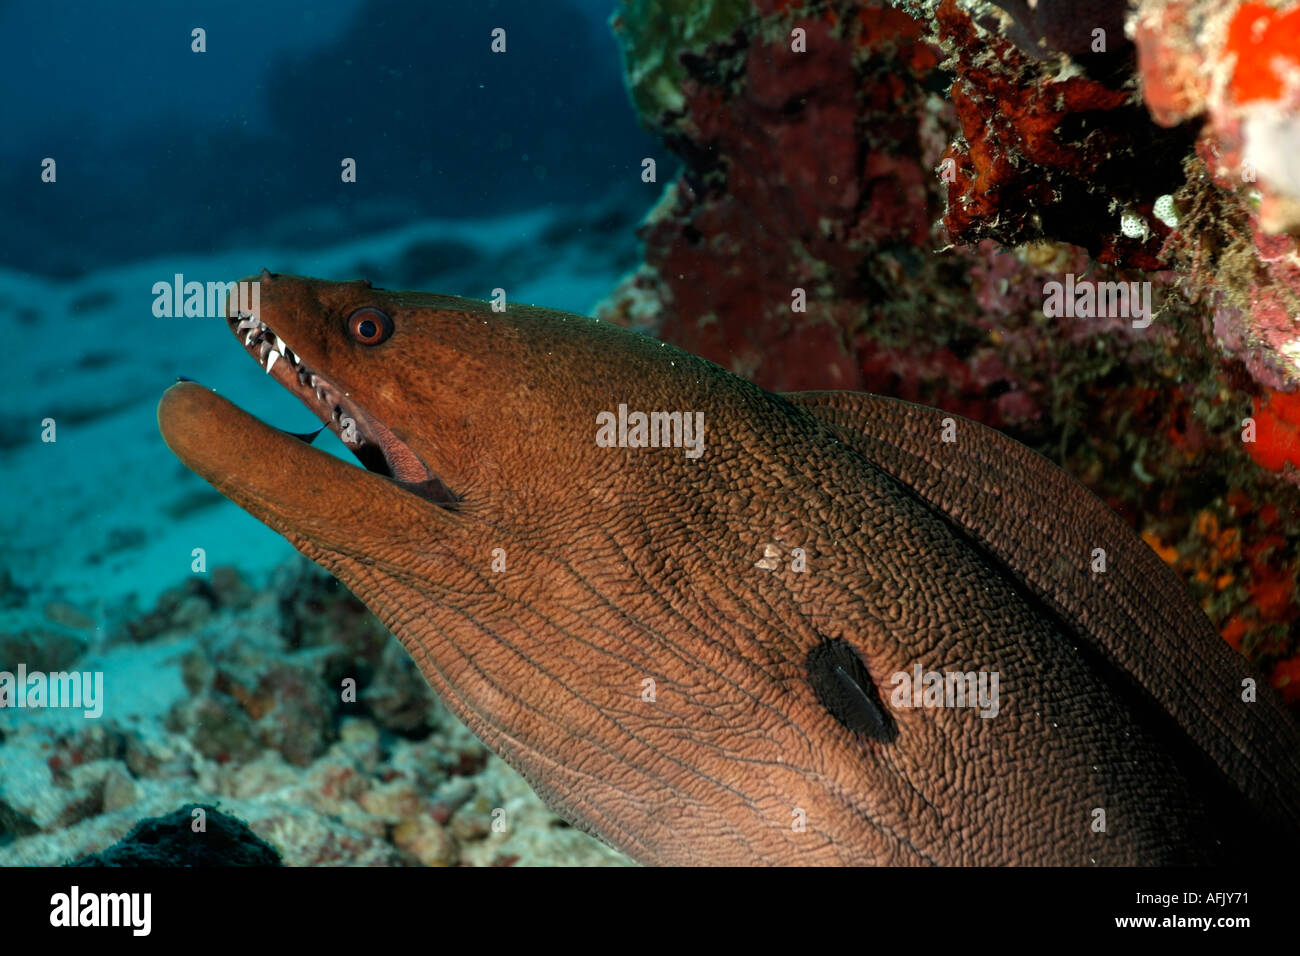 Giant Moray eel - Gymnothorax javanicus - peering out of a rocky hole Stock Photo